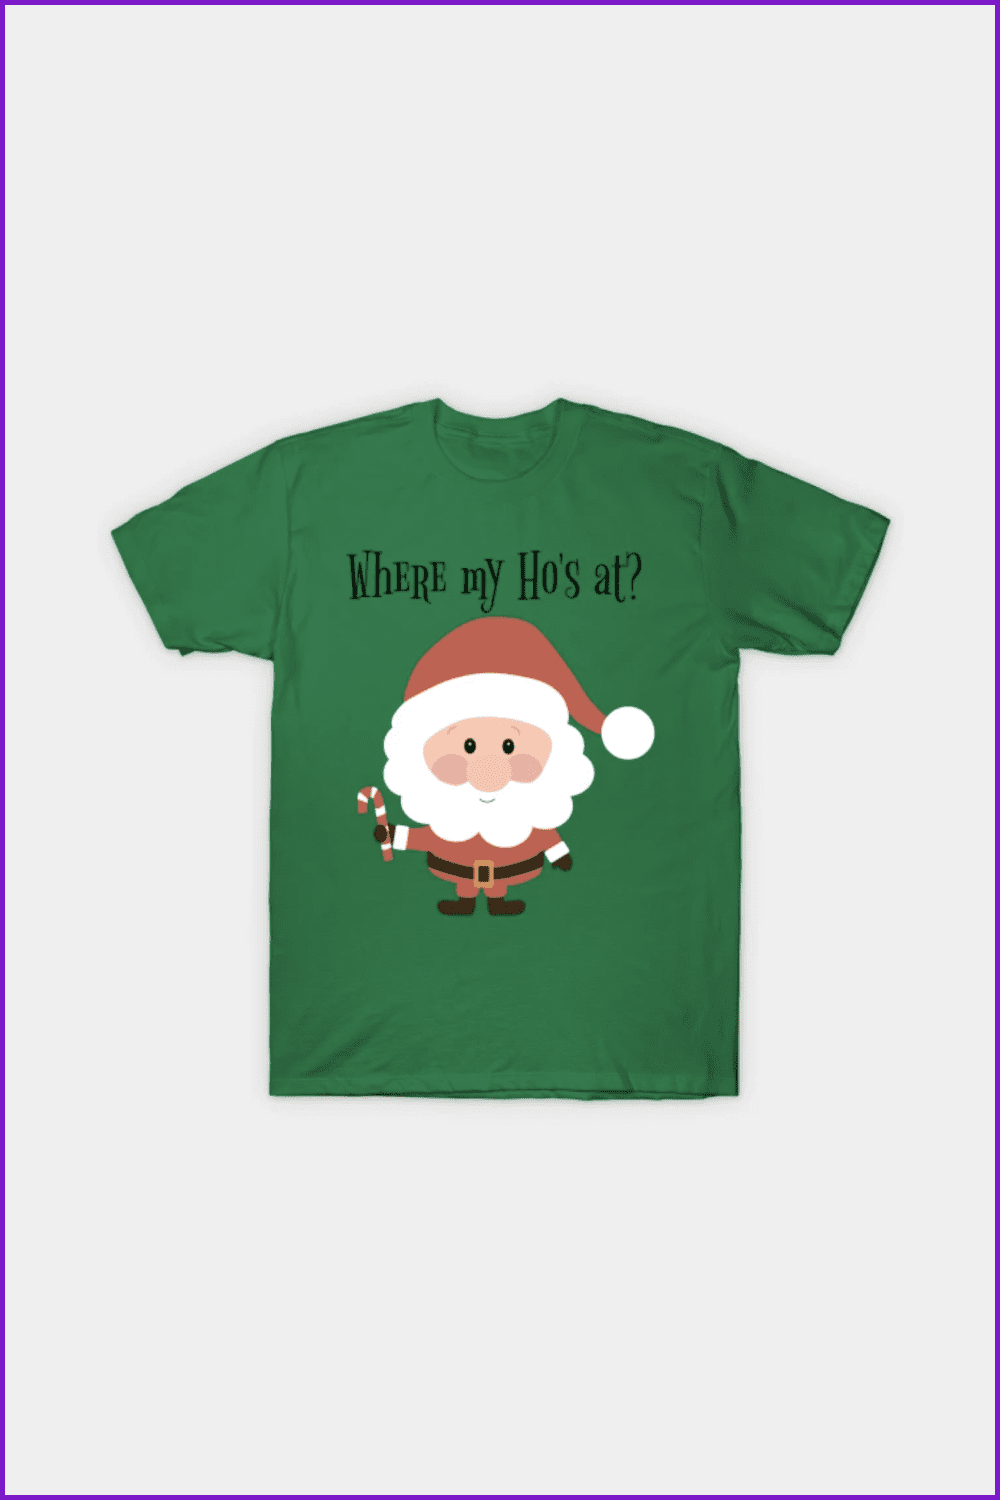 Green t-shirt with a cartoonish Santa Claus with a candy cane.